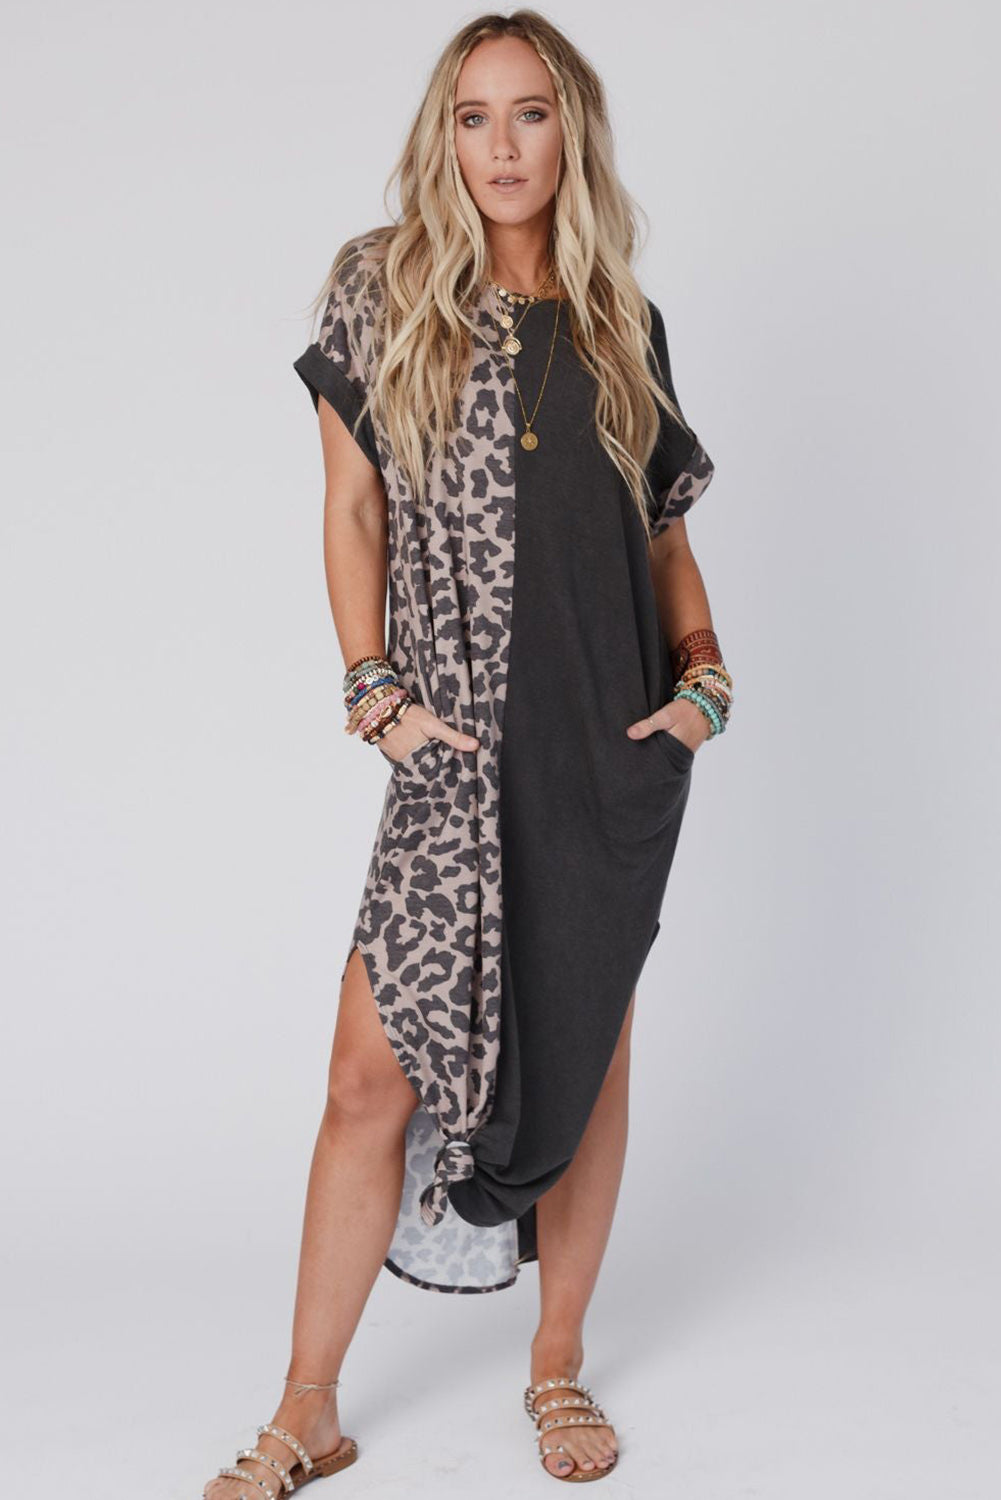 Contrast Solid Leopard Short Sleeve T-shirt Dress with Slits (3 Colors)